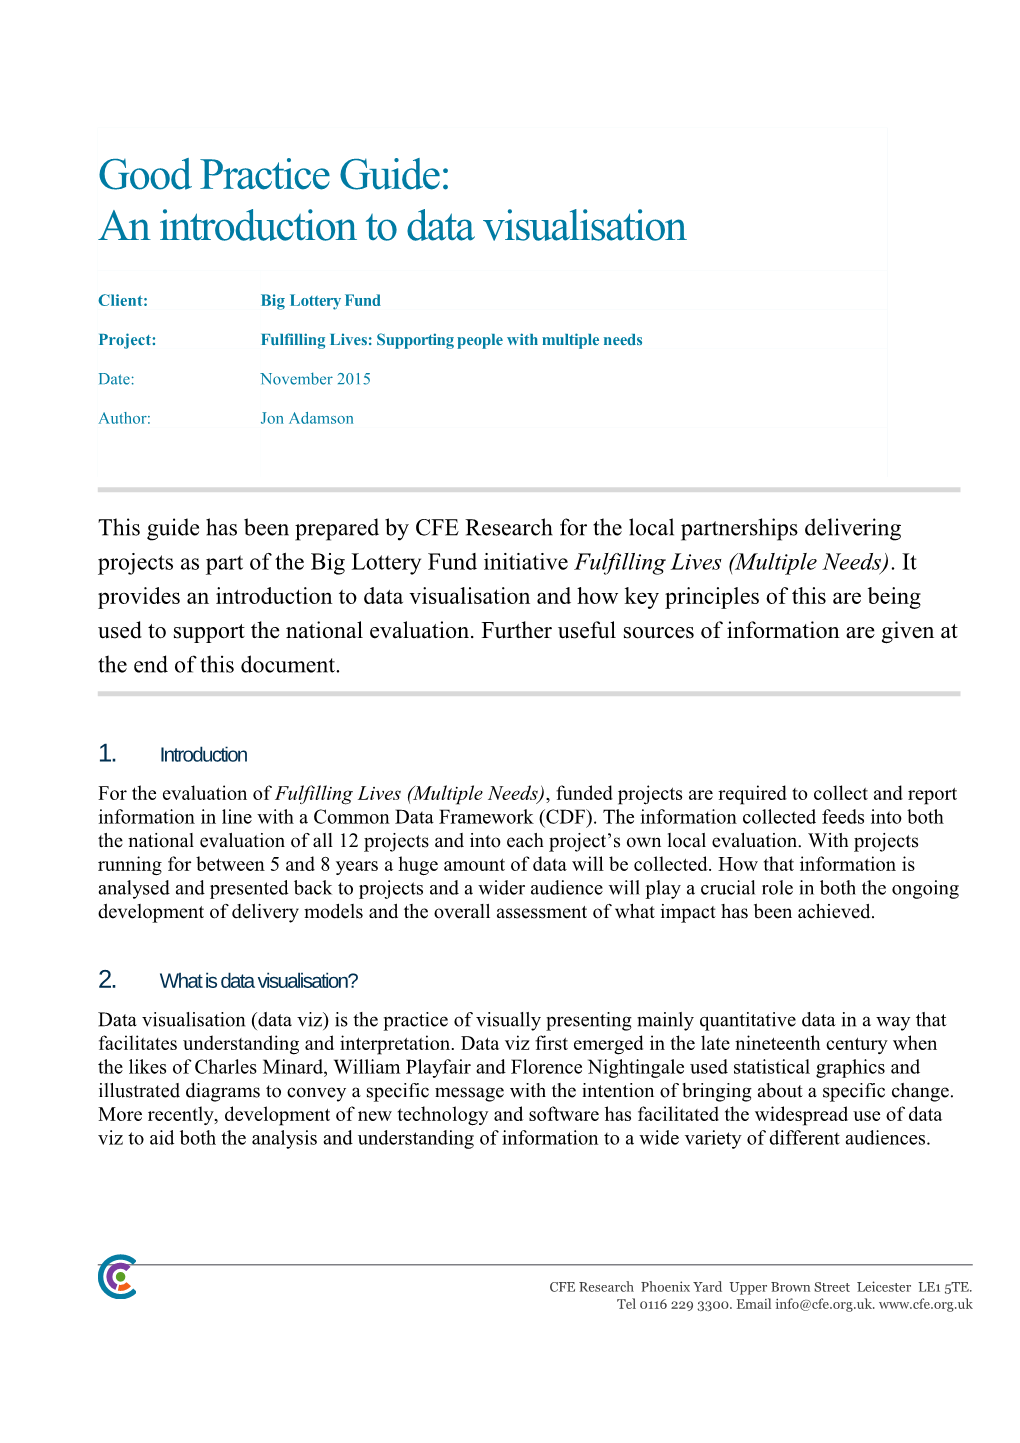 What Is Data Visualisation?